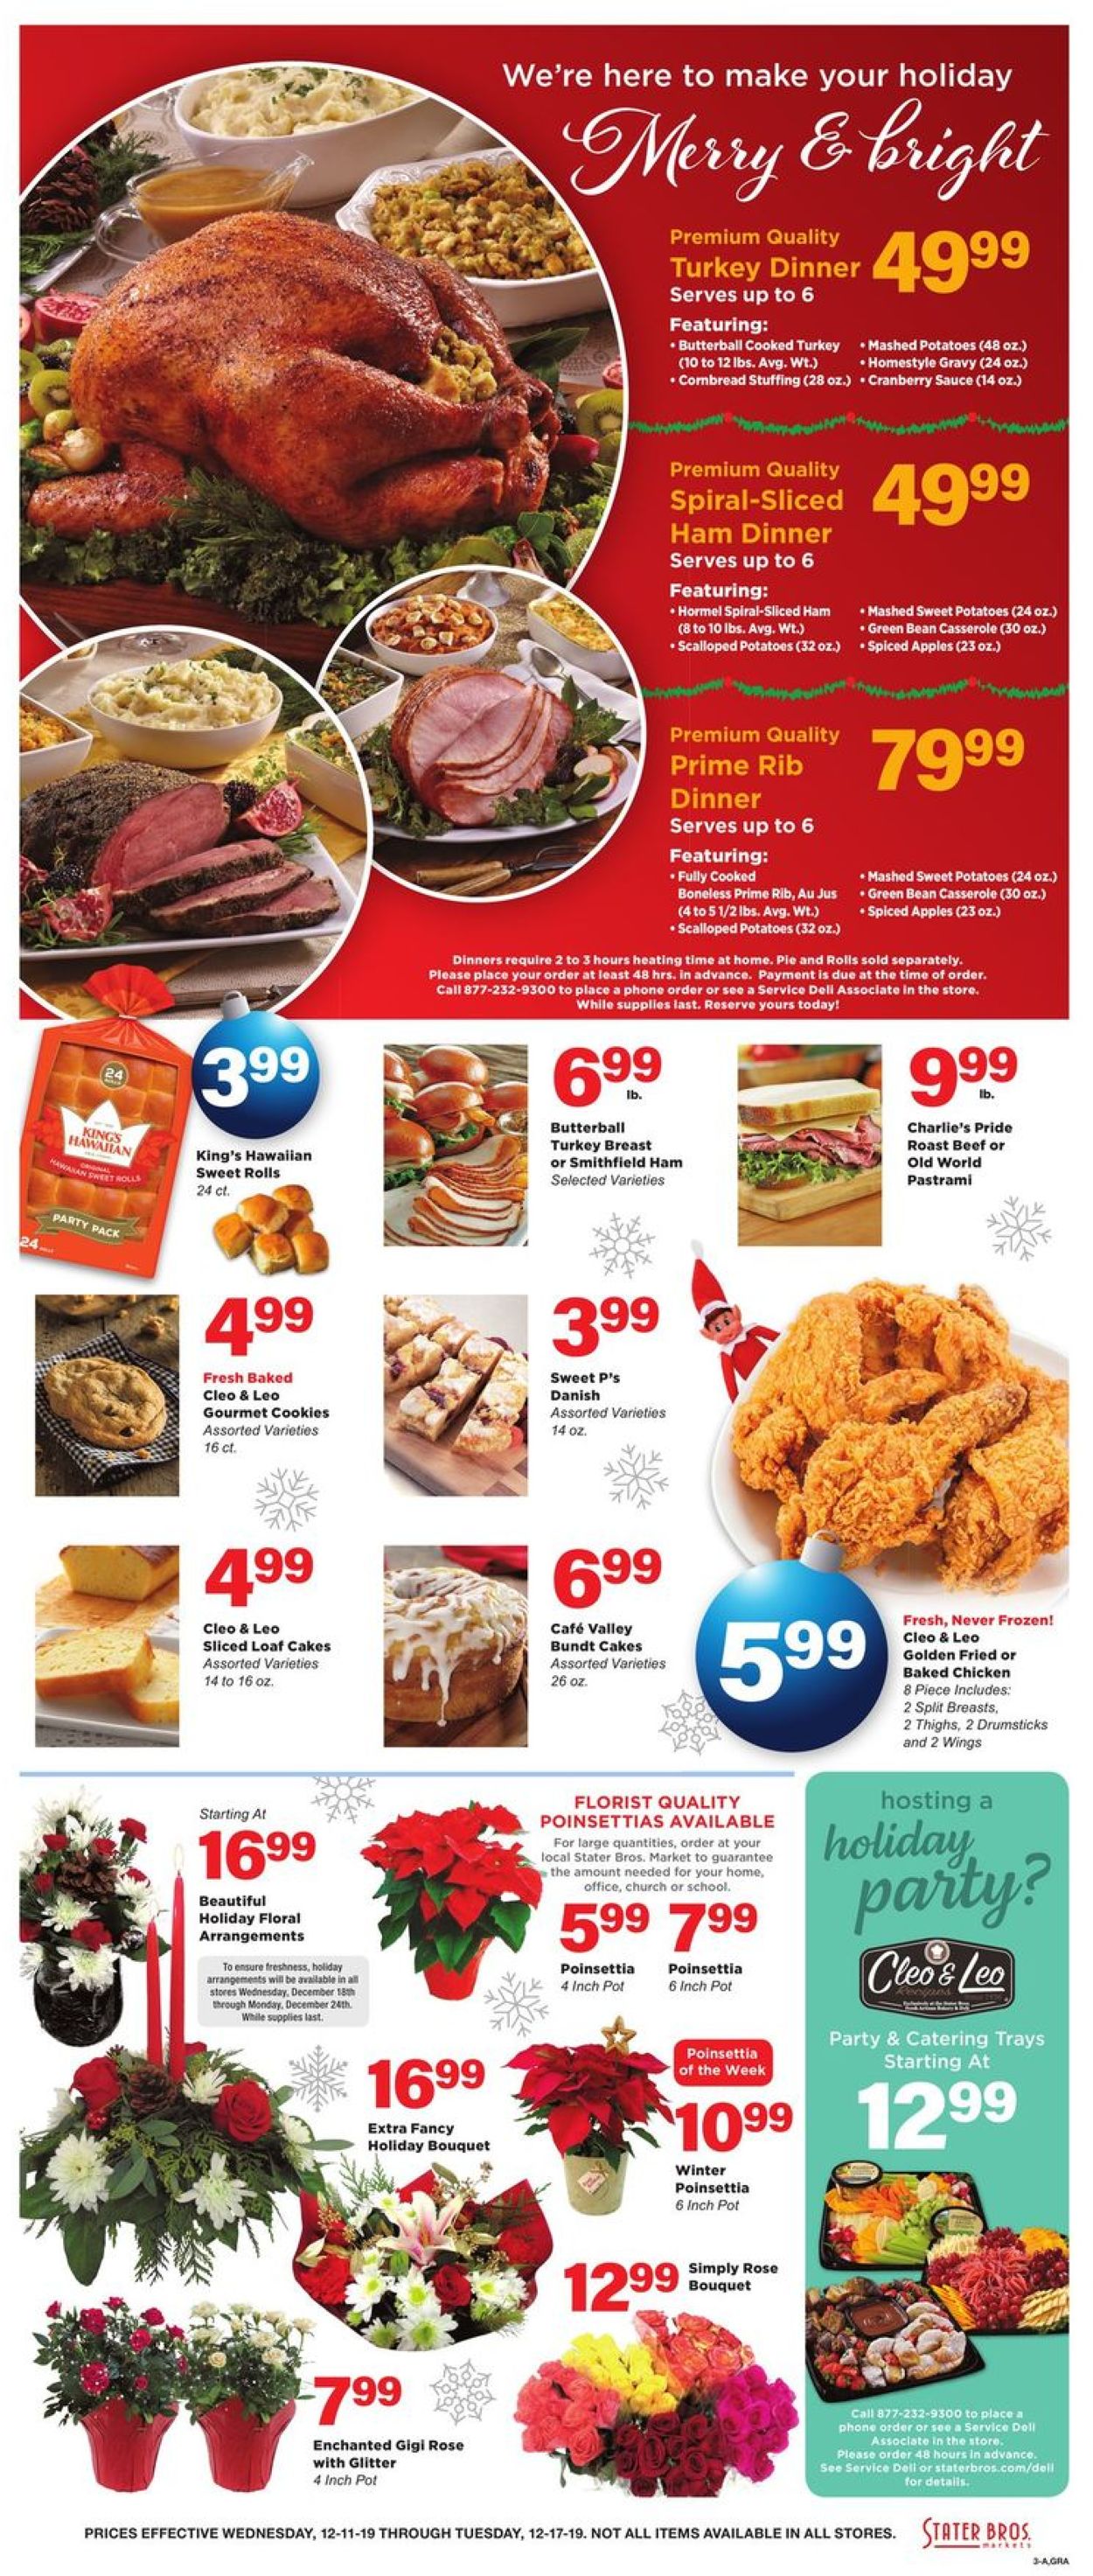 Stater Bros. Ad from 12/11/2019